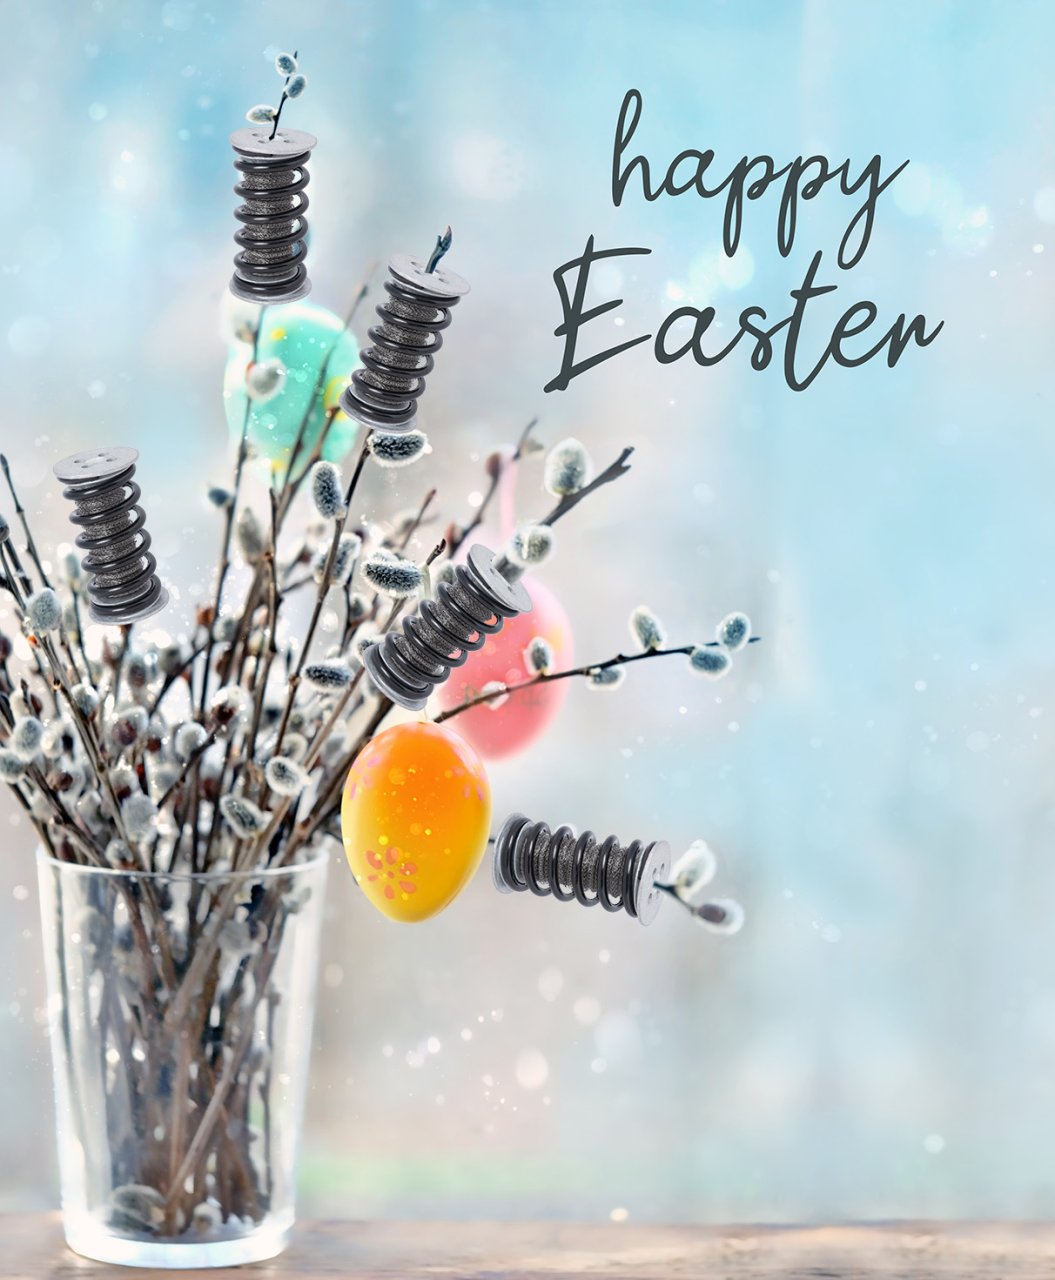 Happy Easter from Vibratec